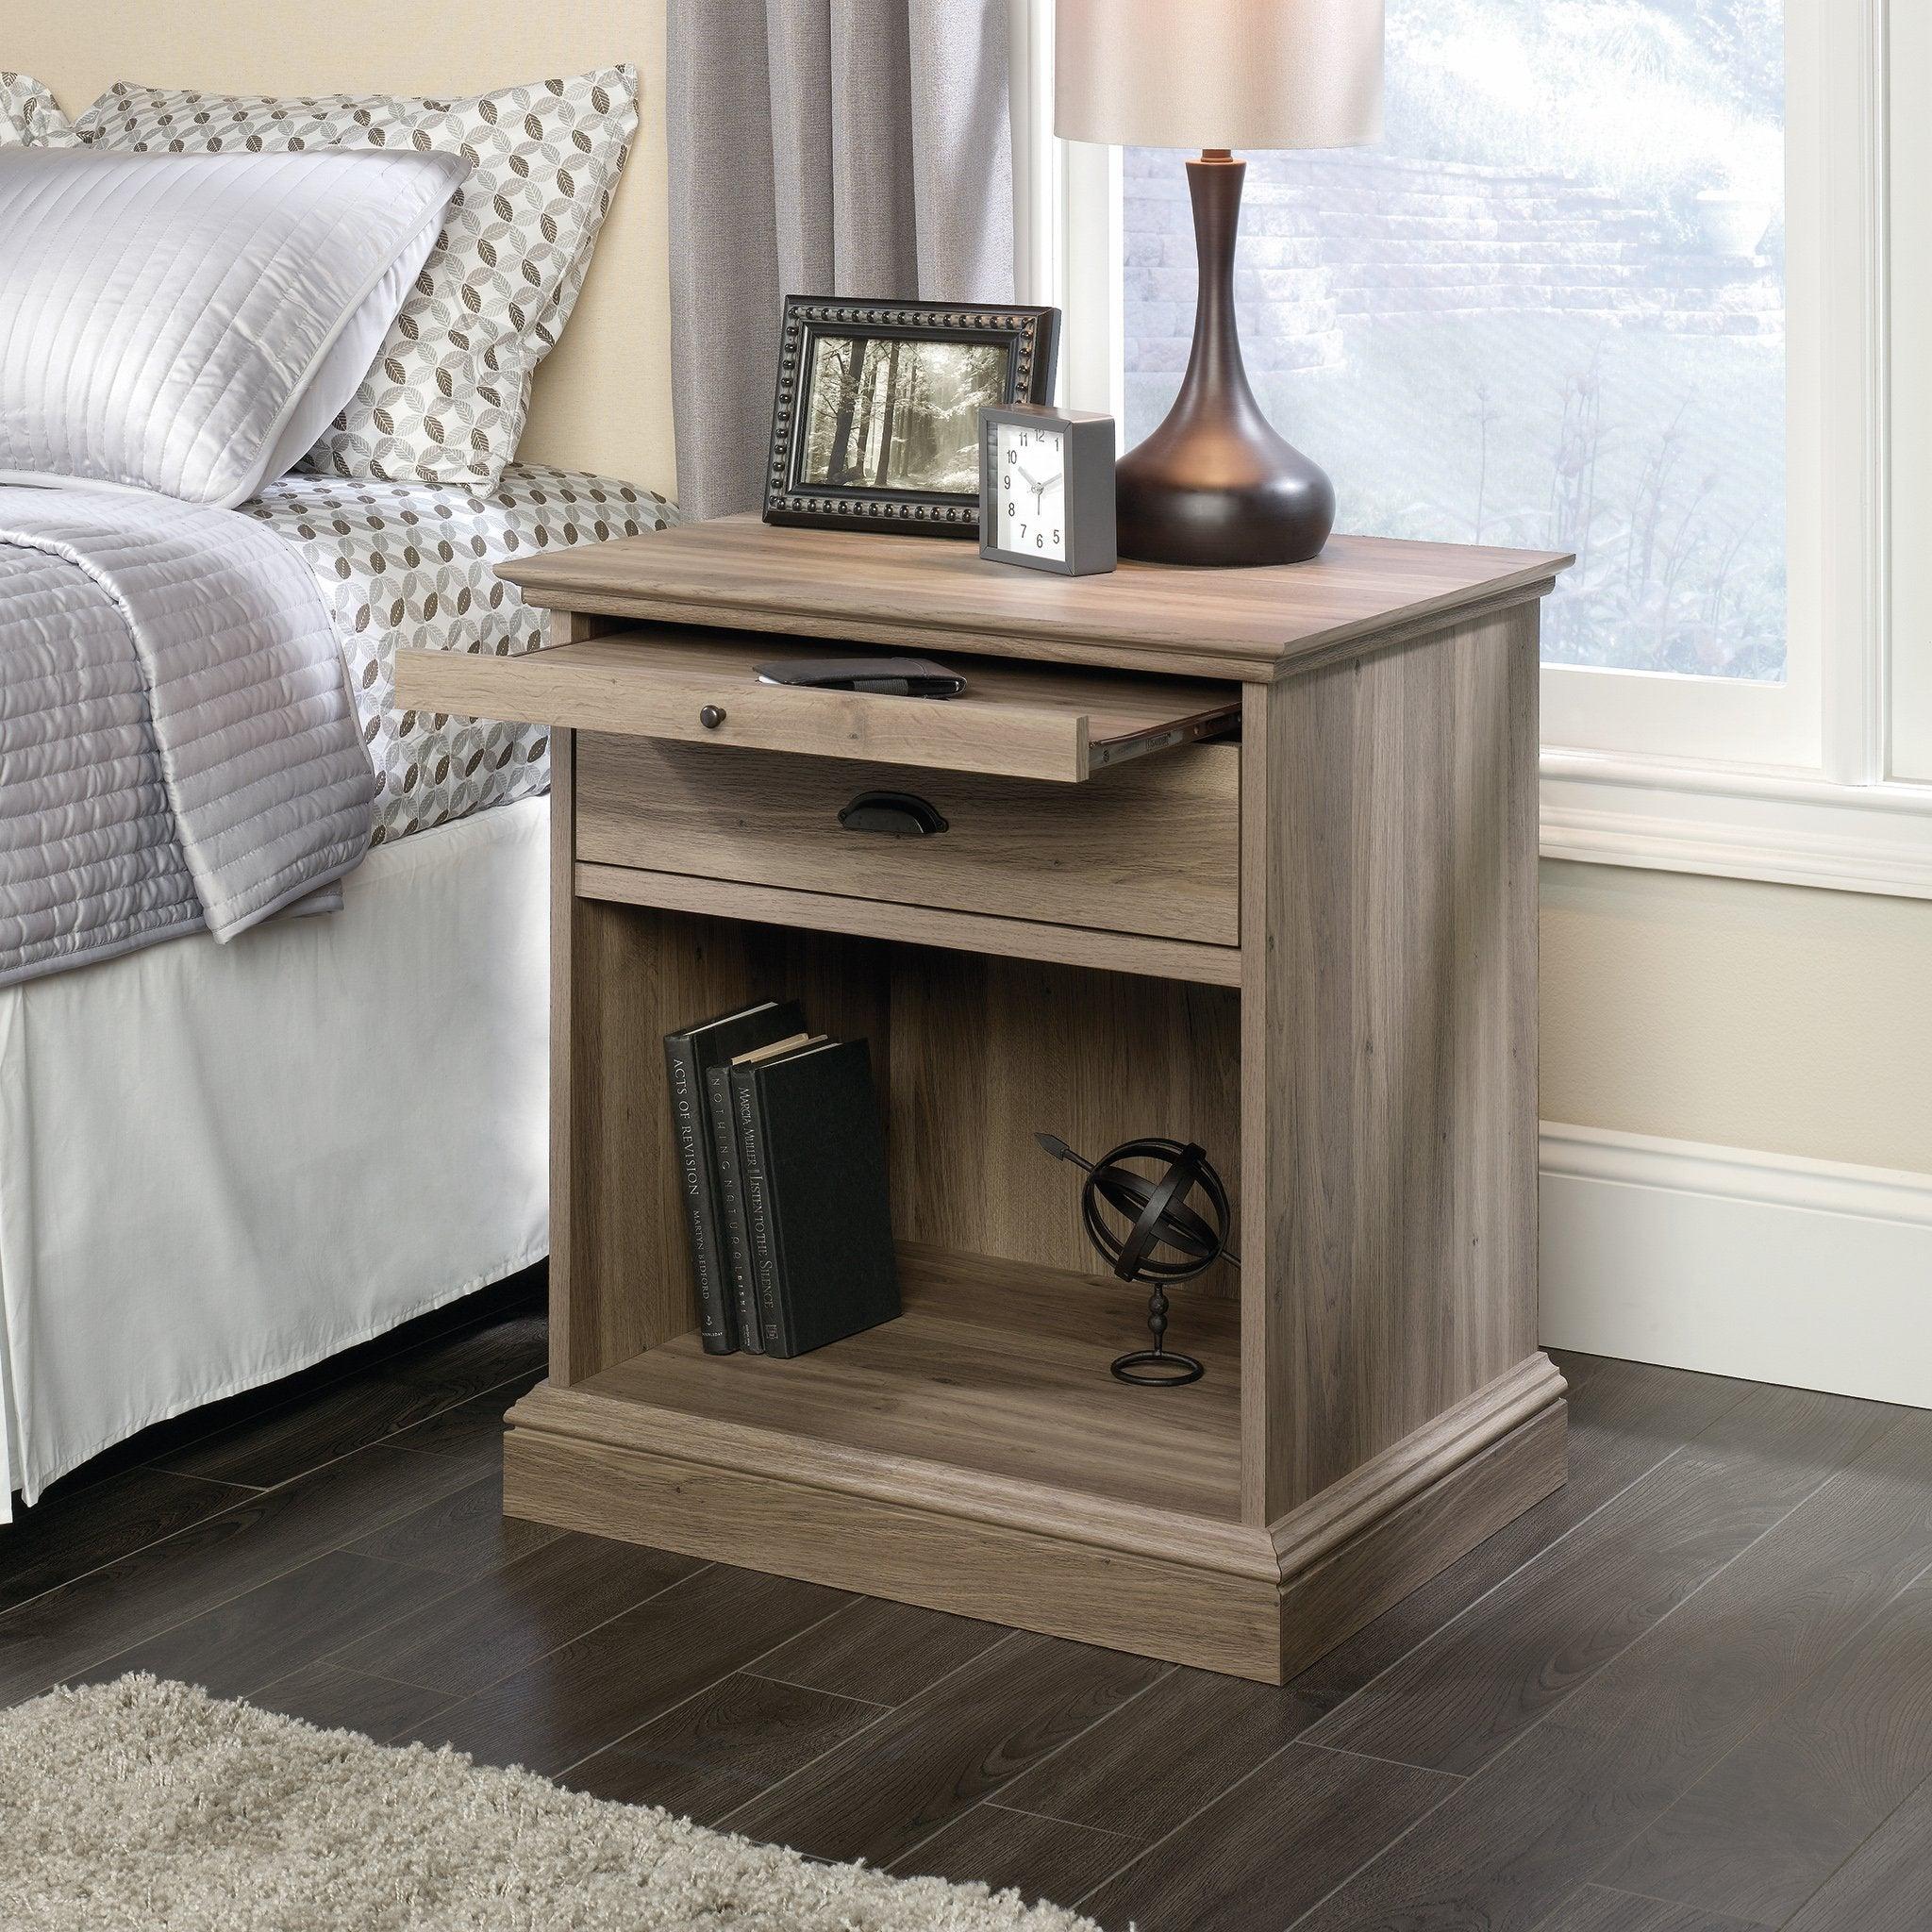 Barrister home night stand - image 2